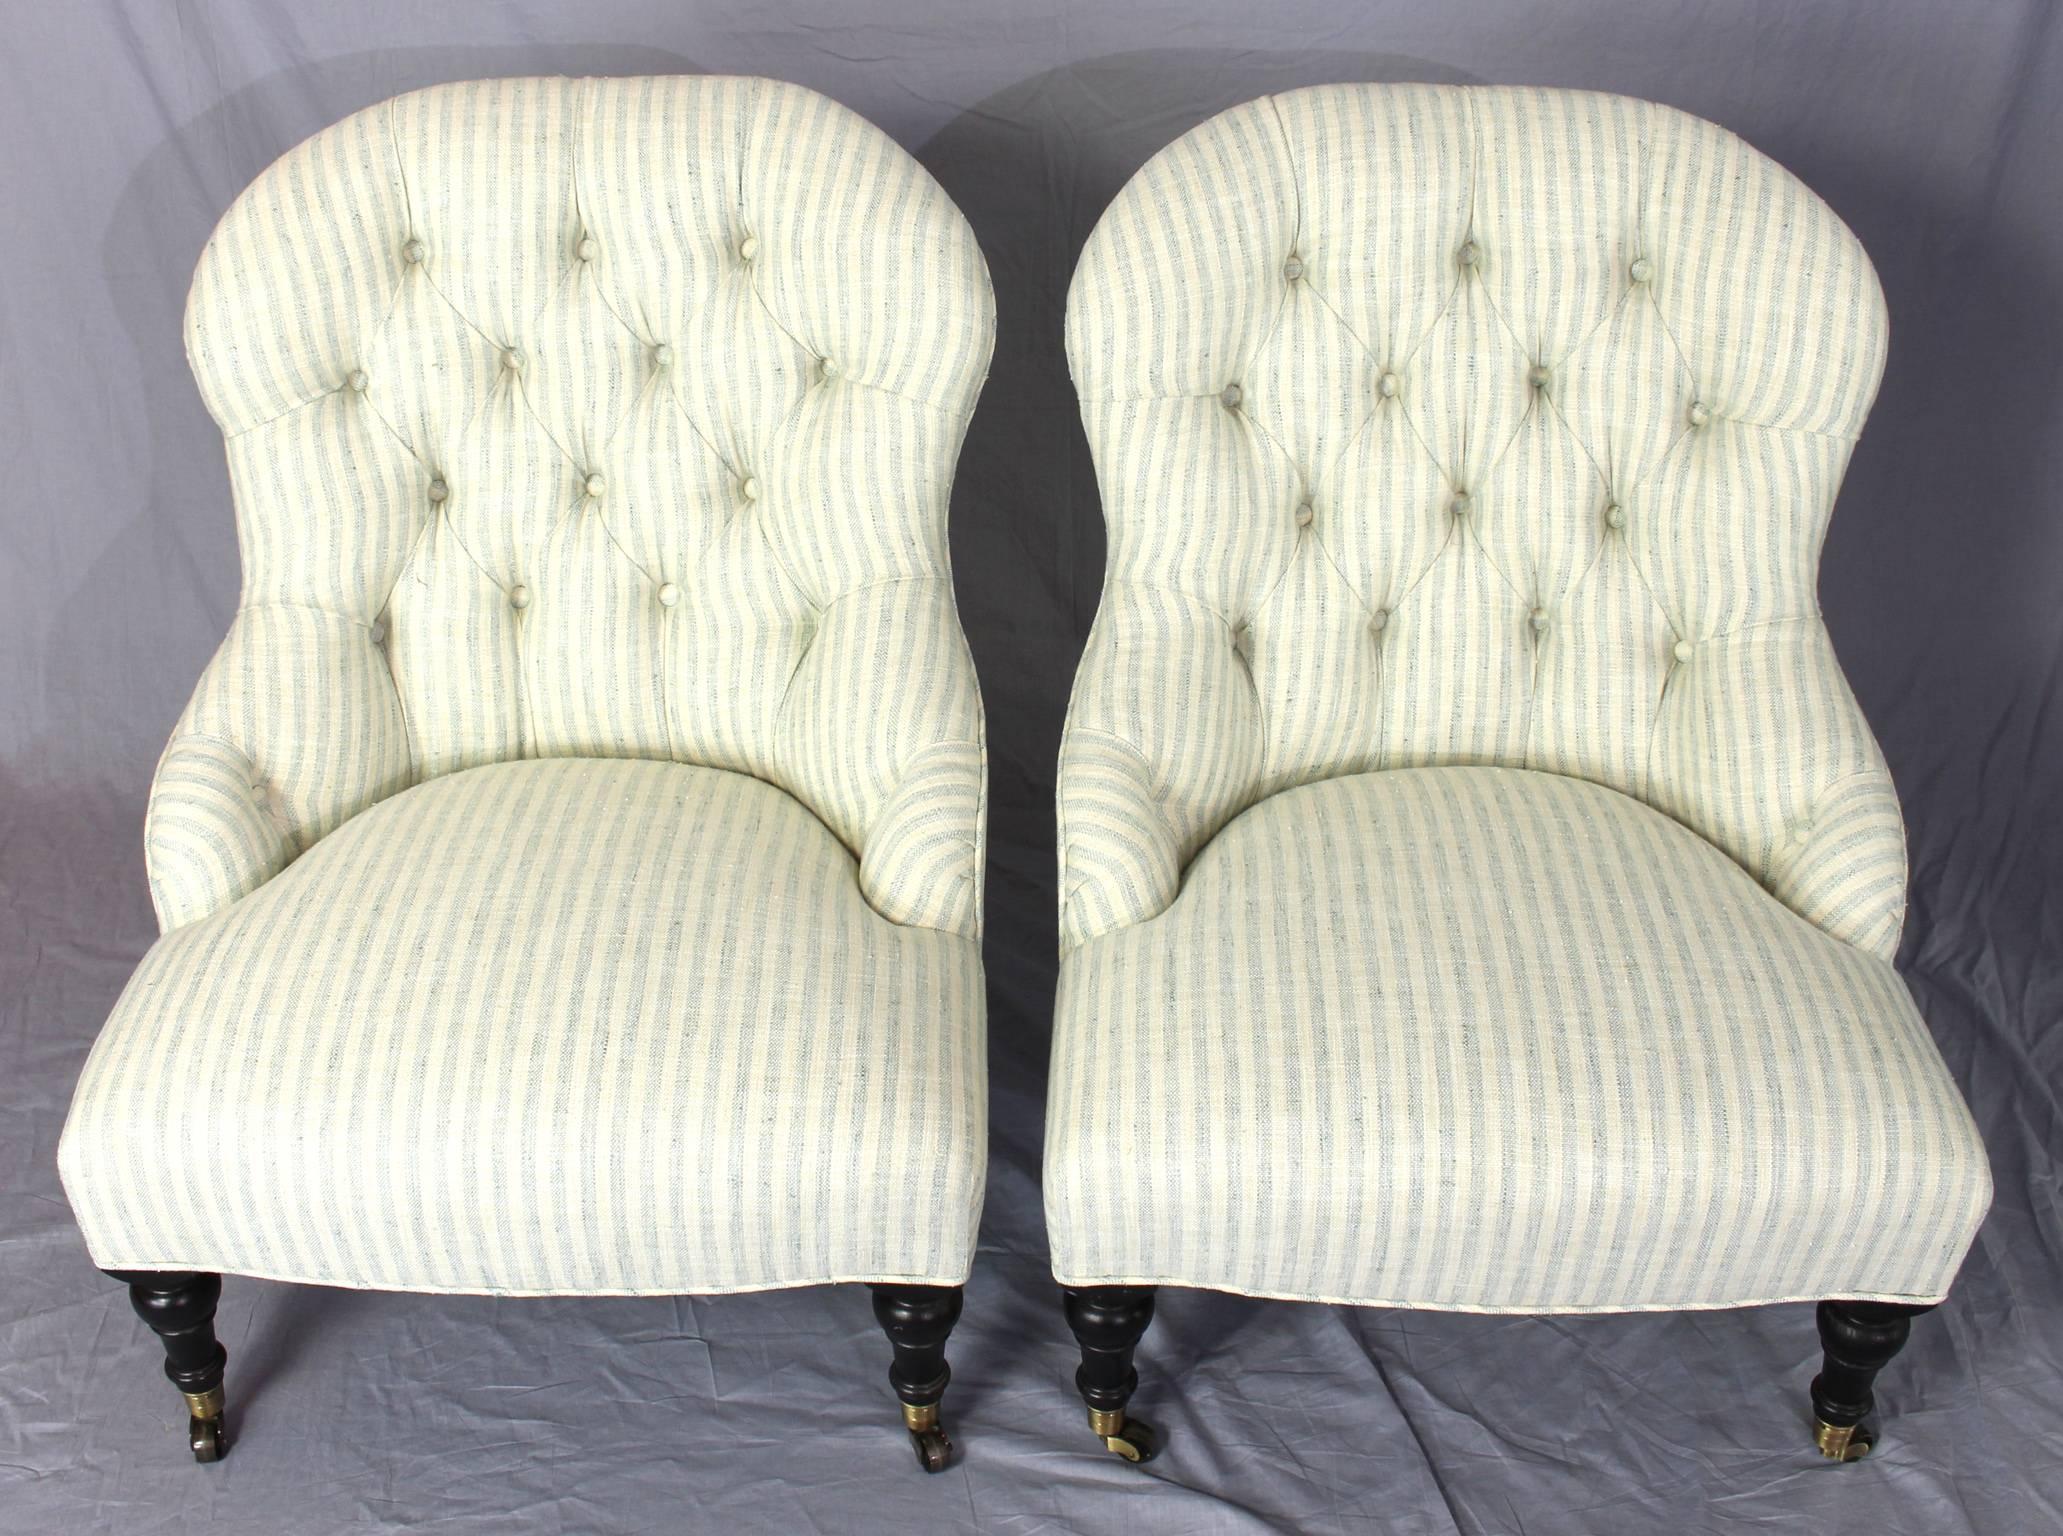 Pair of Edwardian Style Slipper Chairs 1